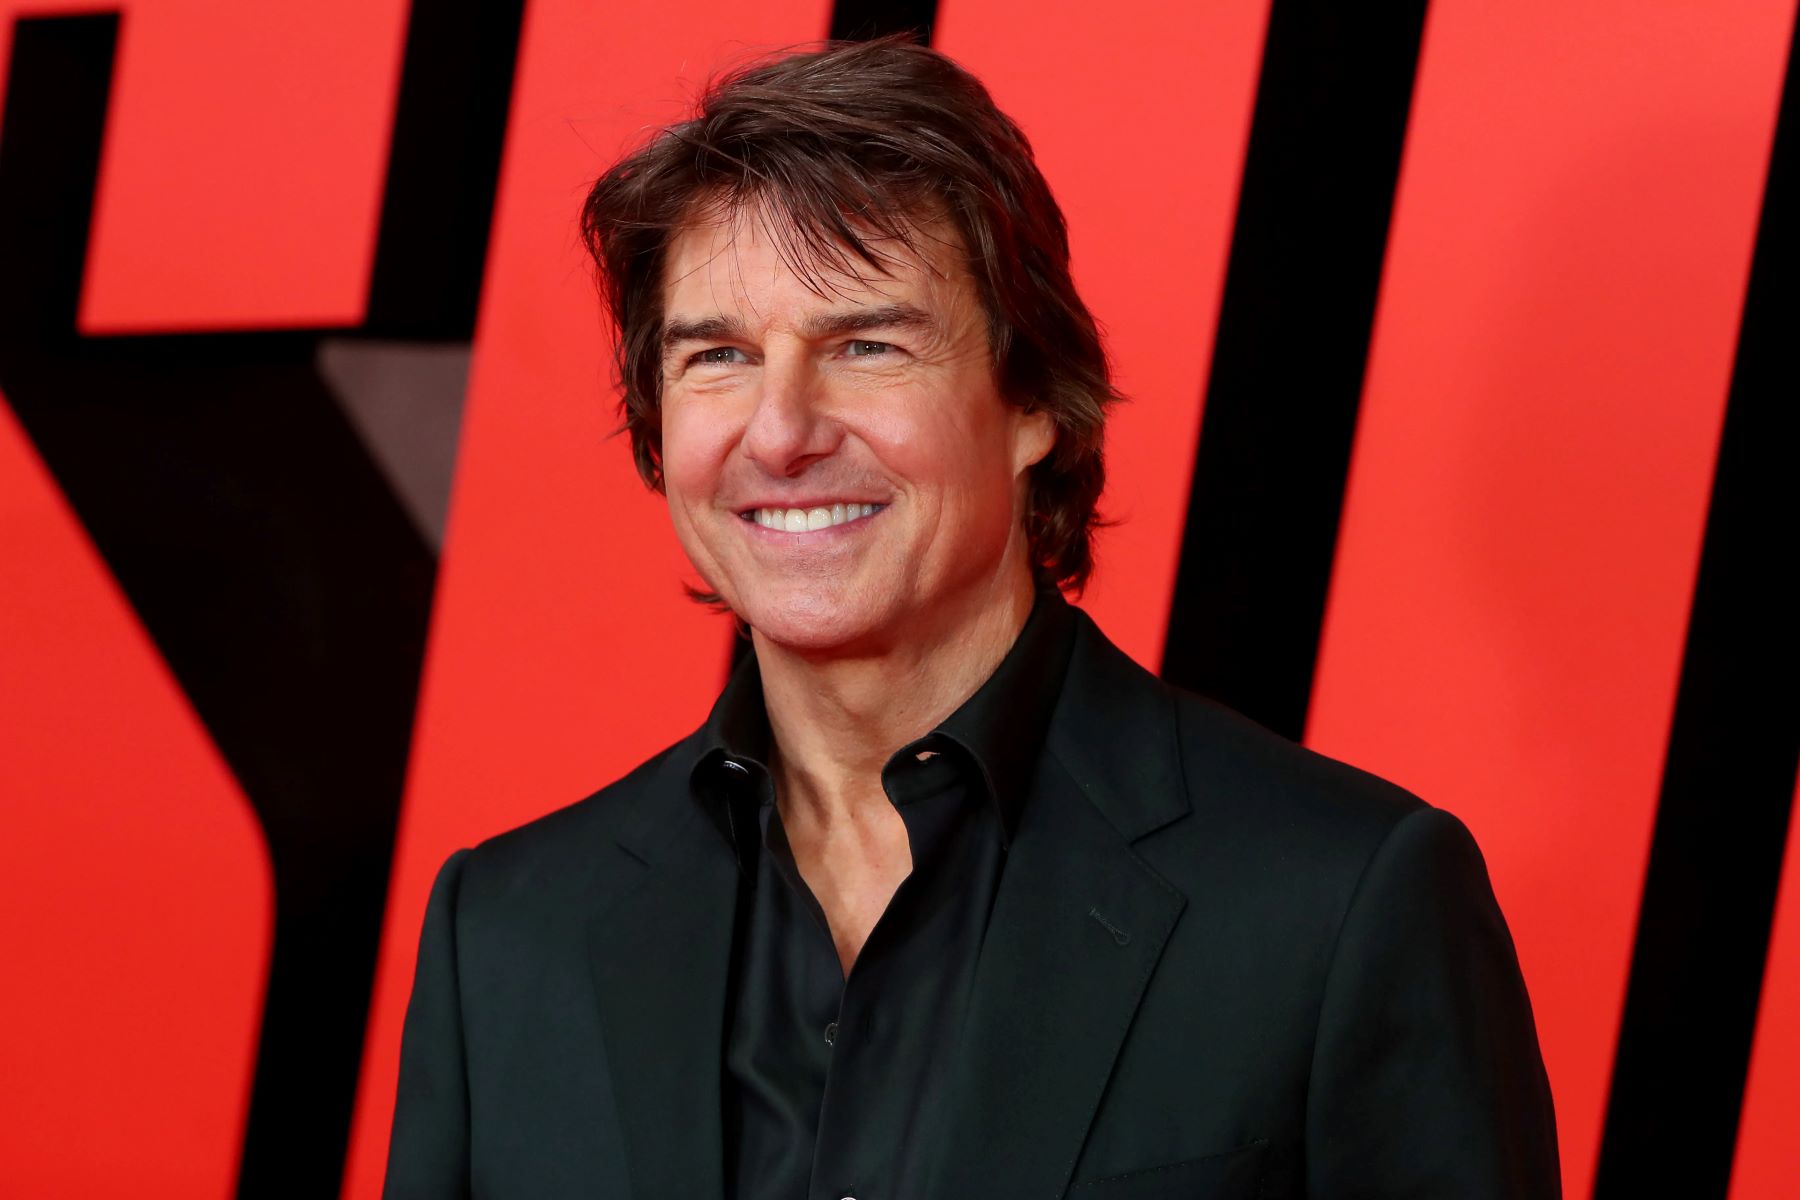 Tom Cruise's Shocking Transformation: You Won't Believe What Happened To His Face!